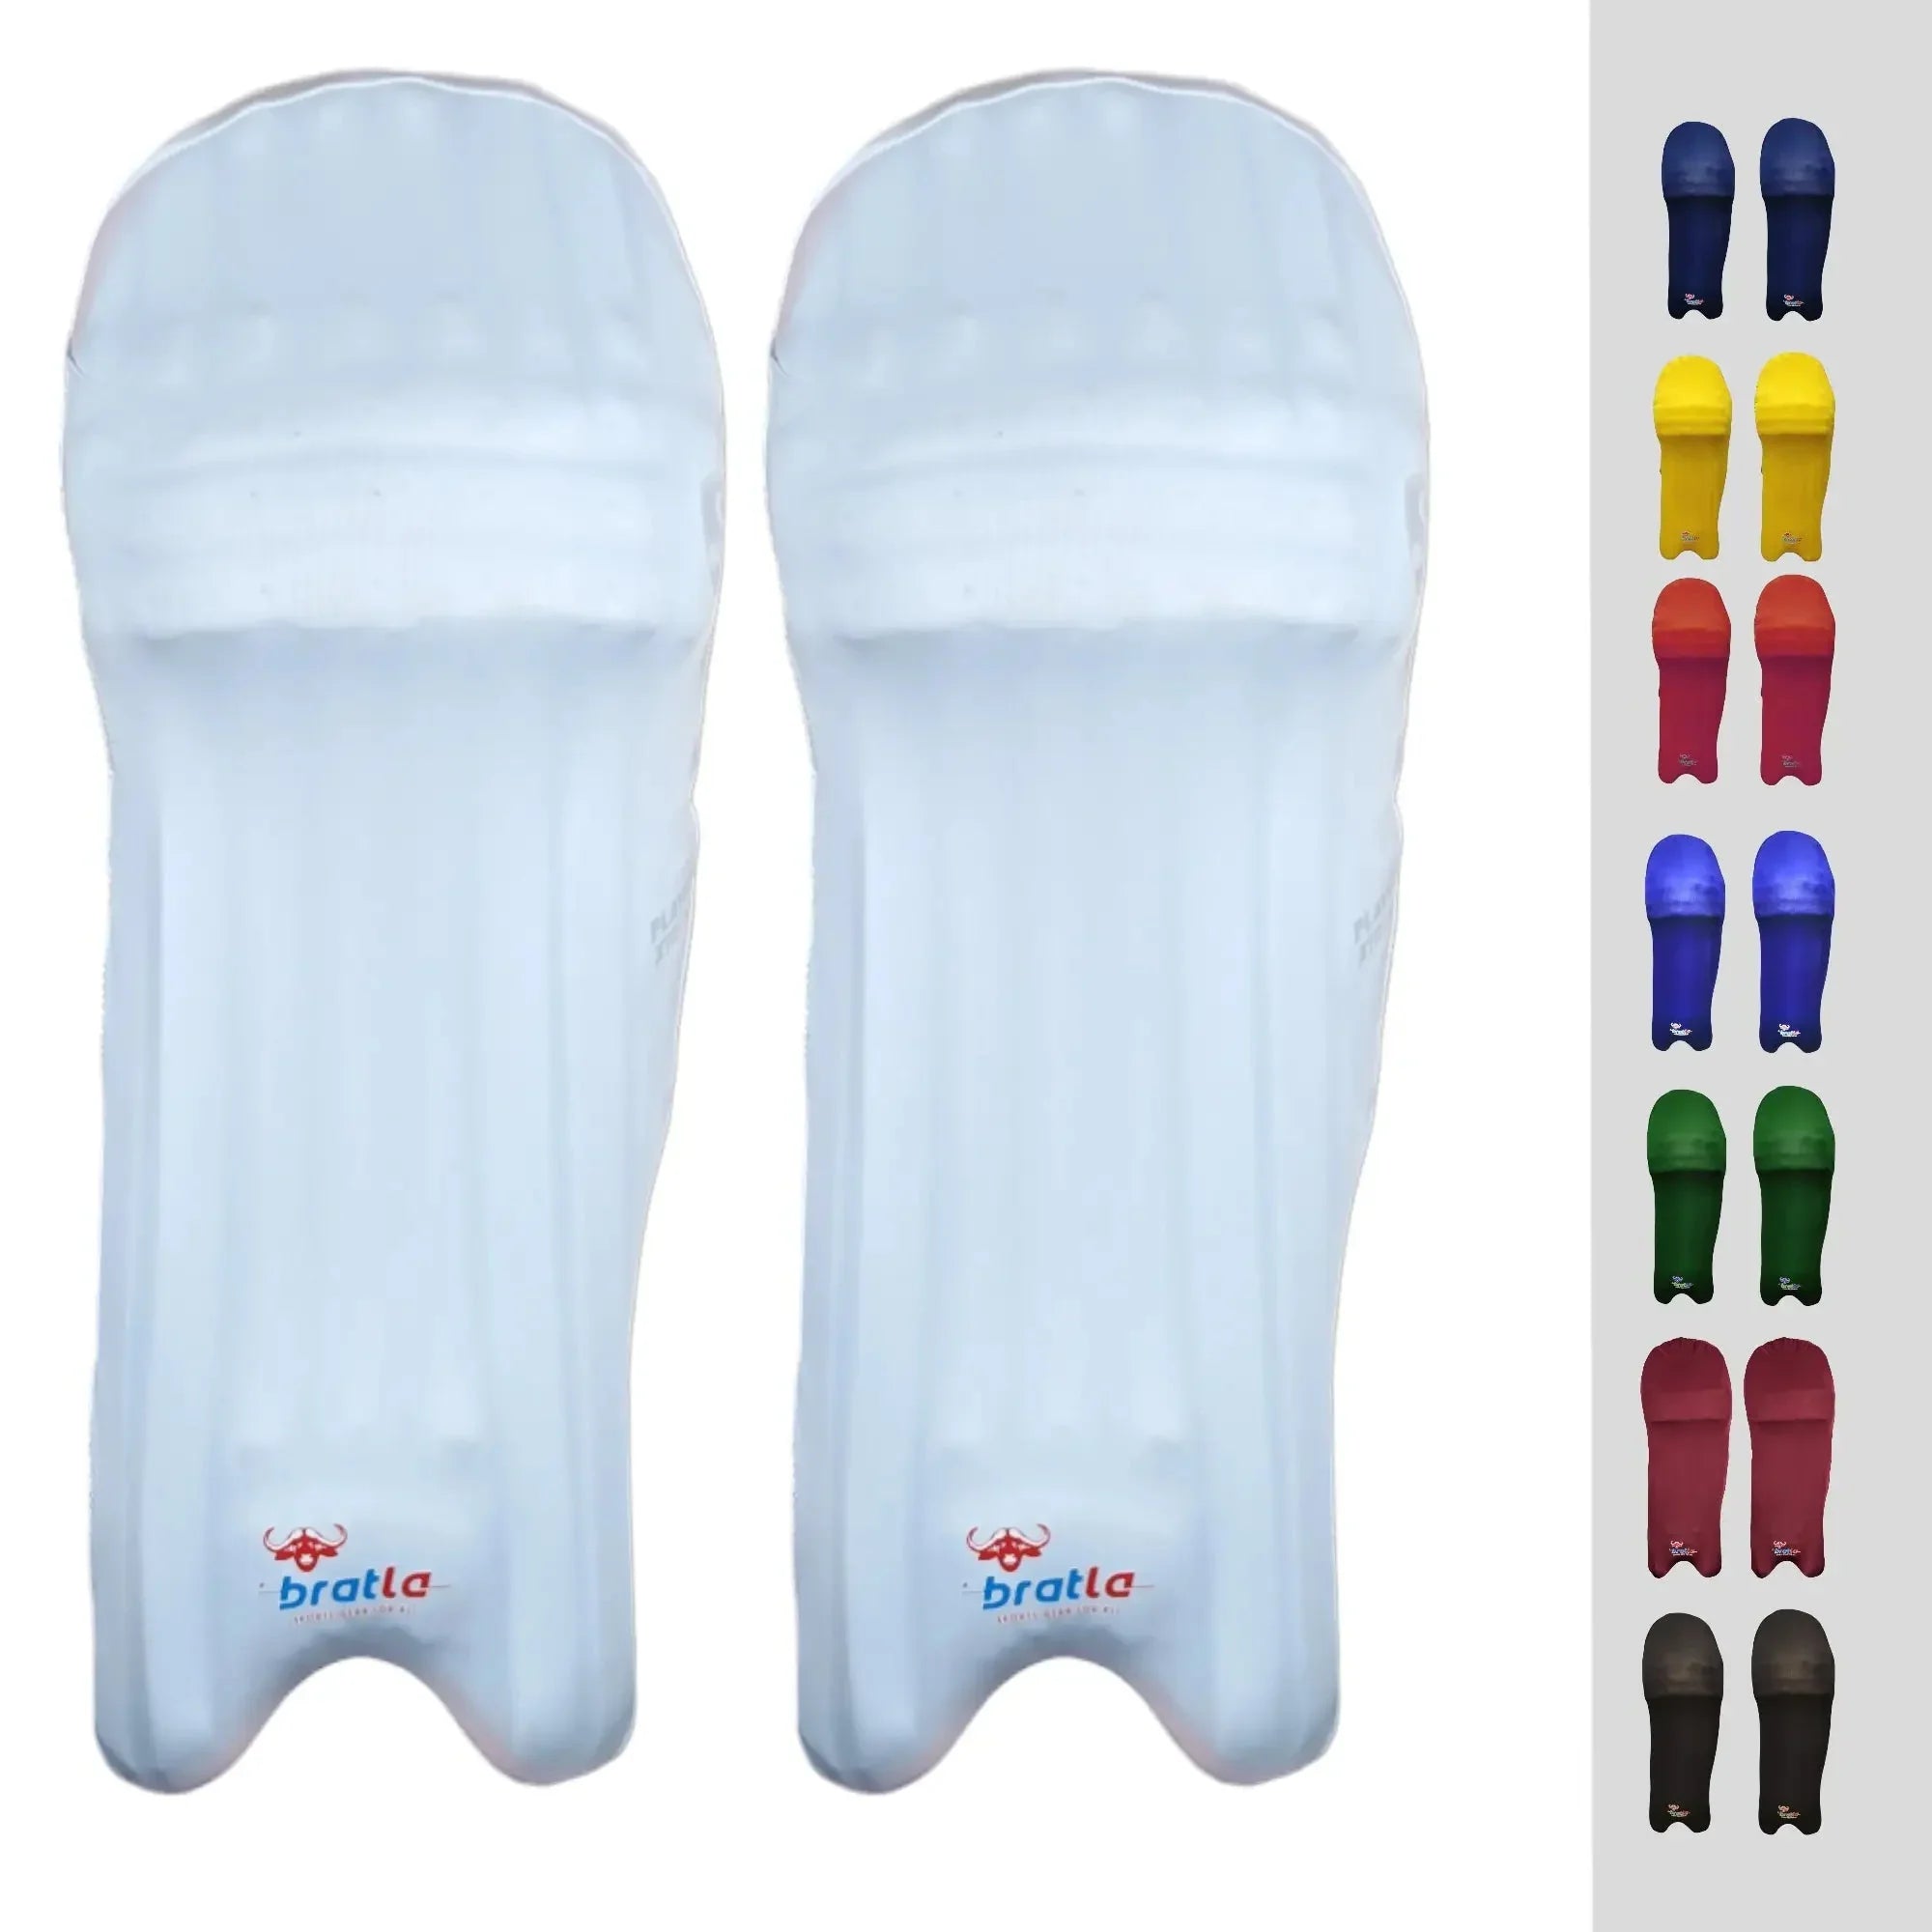 Bratla Cricket Batting Pad Covers Fit Neatly Easily Put On - White - PADS - BATTING COVER